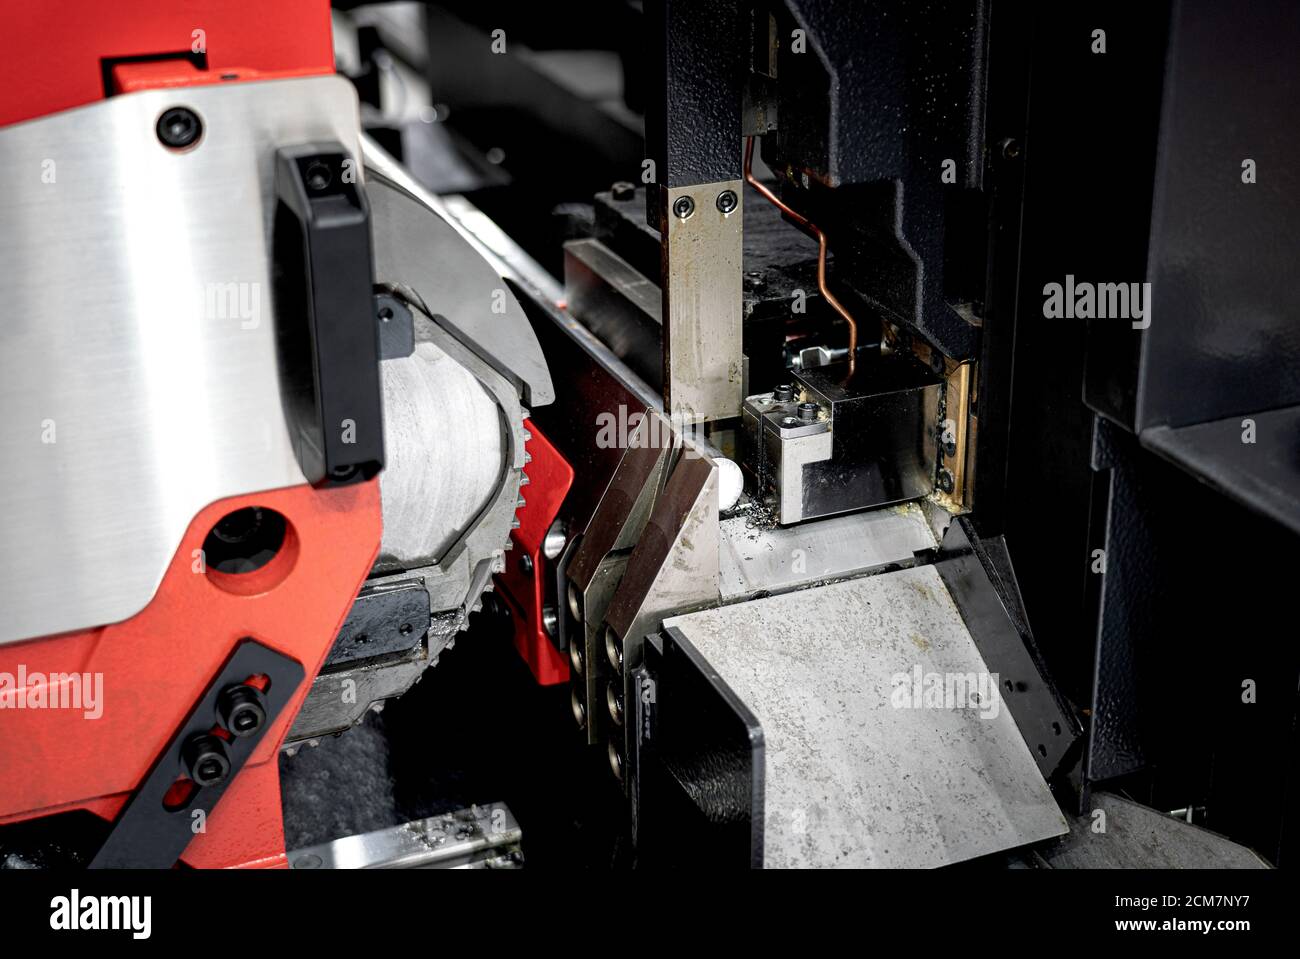 Cutting tool metalworking in manufacturing process by machining. Stock Photo